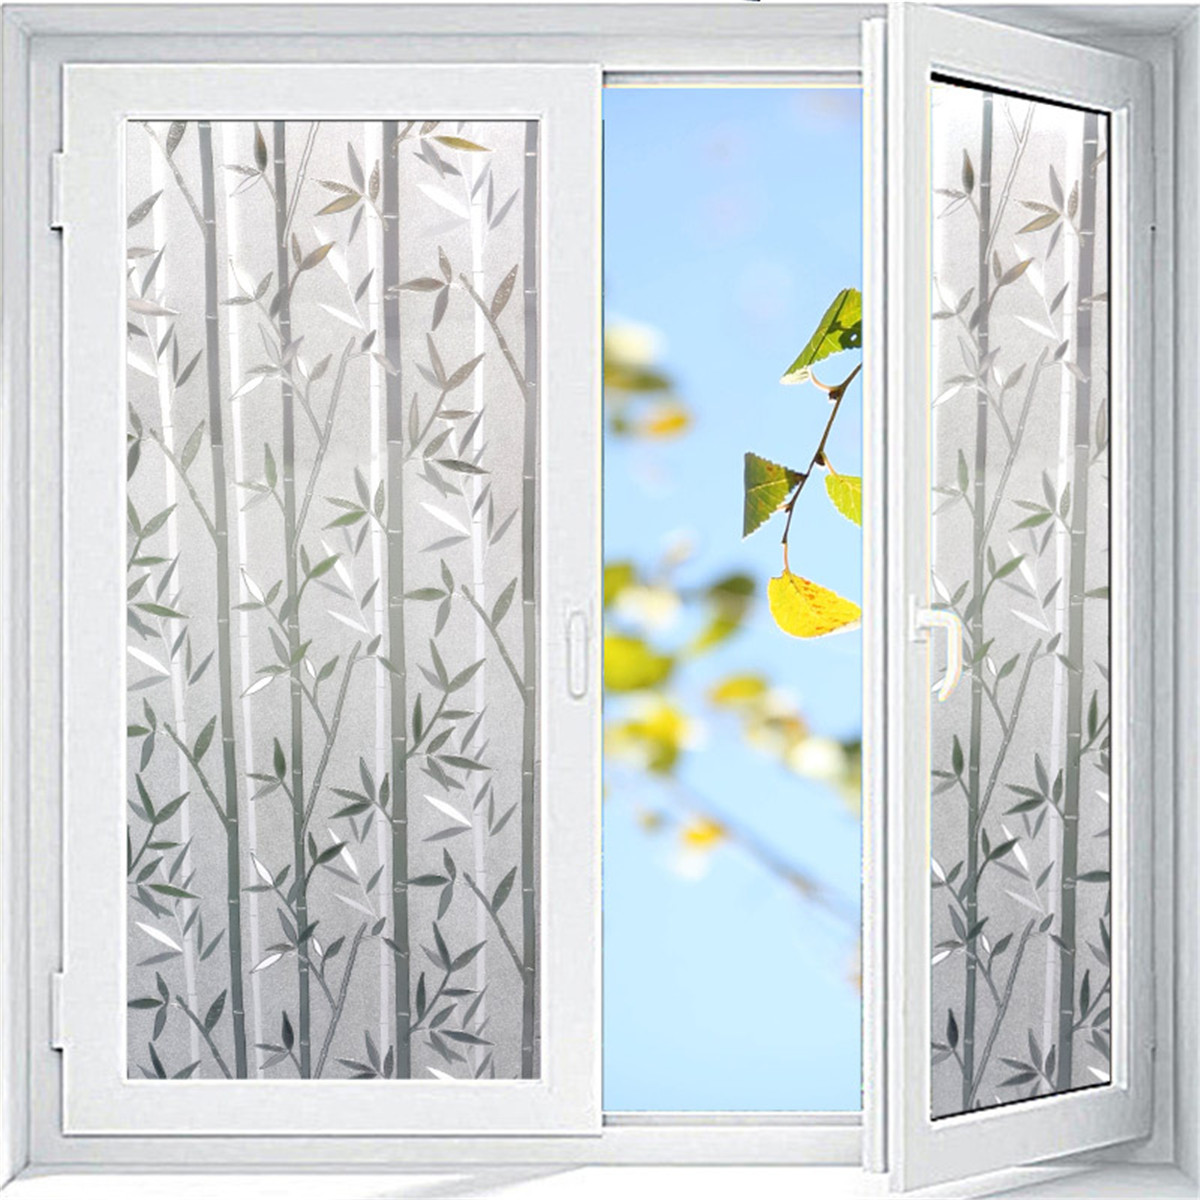 60-x-200cm-Waterproof-PVC-Frosted-Glass-Window-Film-Cover-Window-Privacy-Bedroom-Bathroom-Self-Adhes-1807465-2